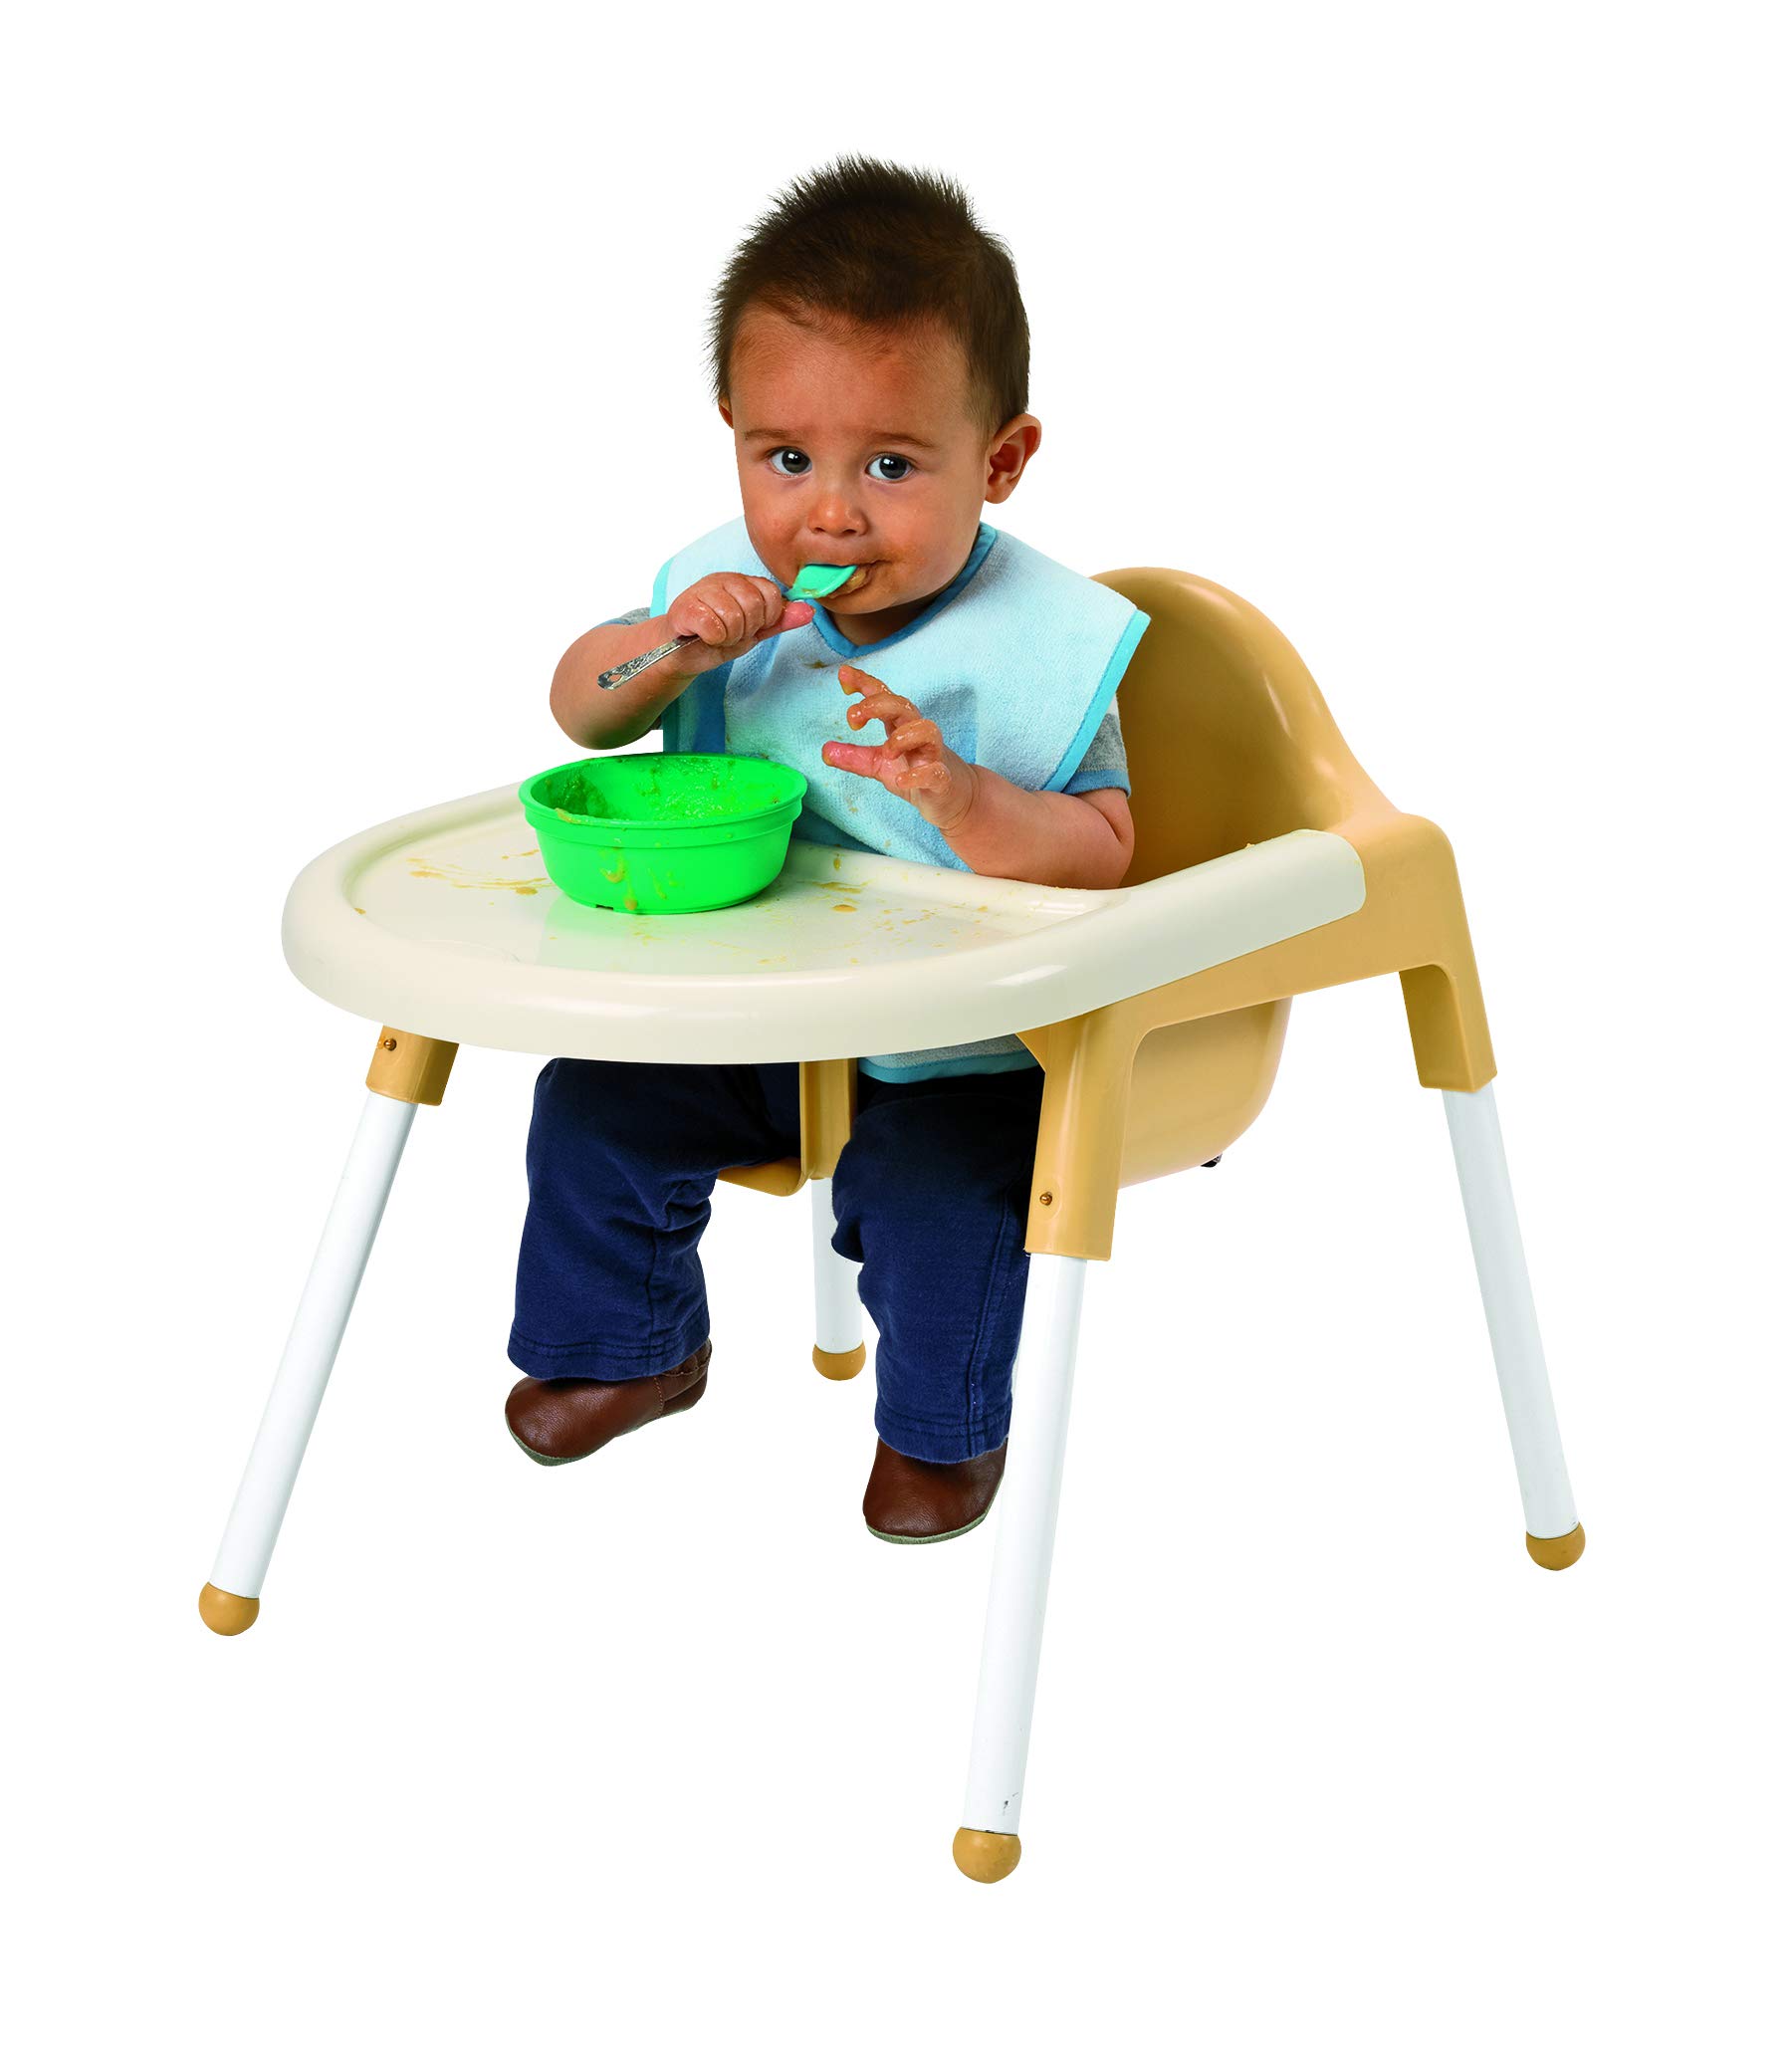 Angeles Feeding Chair, AFB7940, Infant, Baby & Toddler Stacking Nursery Chairs with Harness, Daycare, Homeschool or Classroom Furniture for Girls-Boys